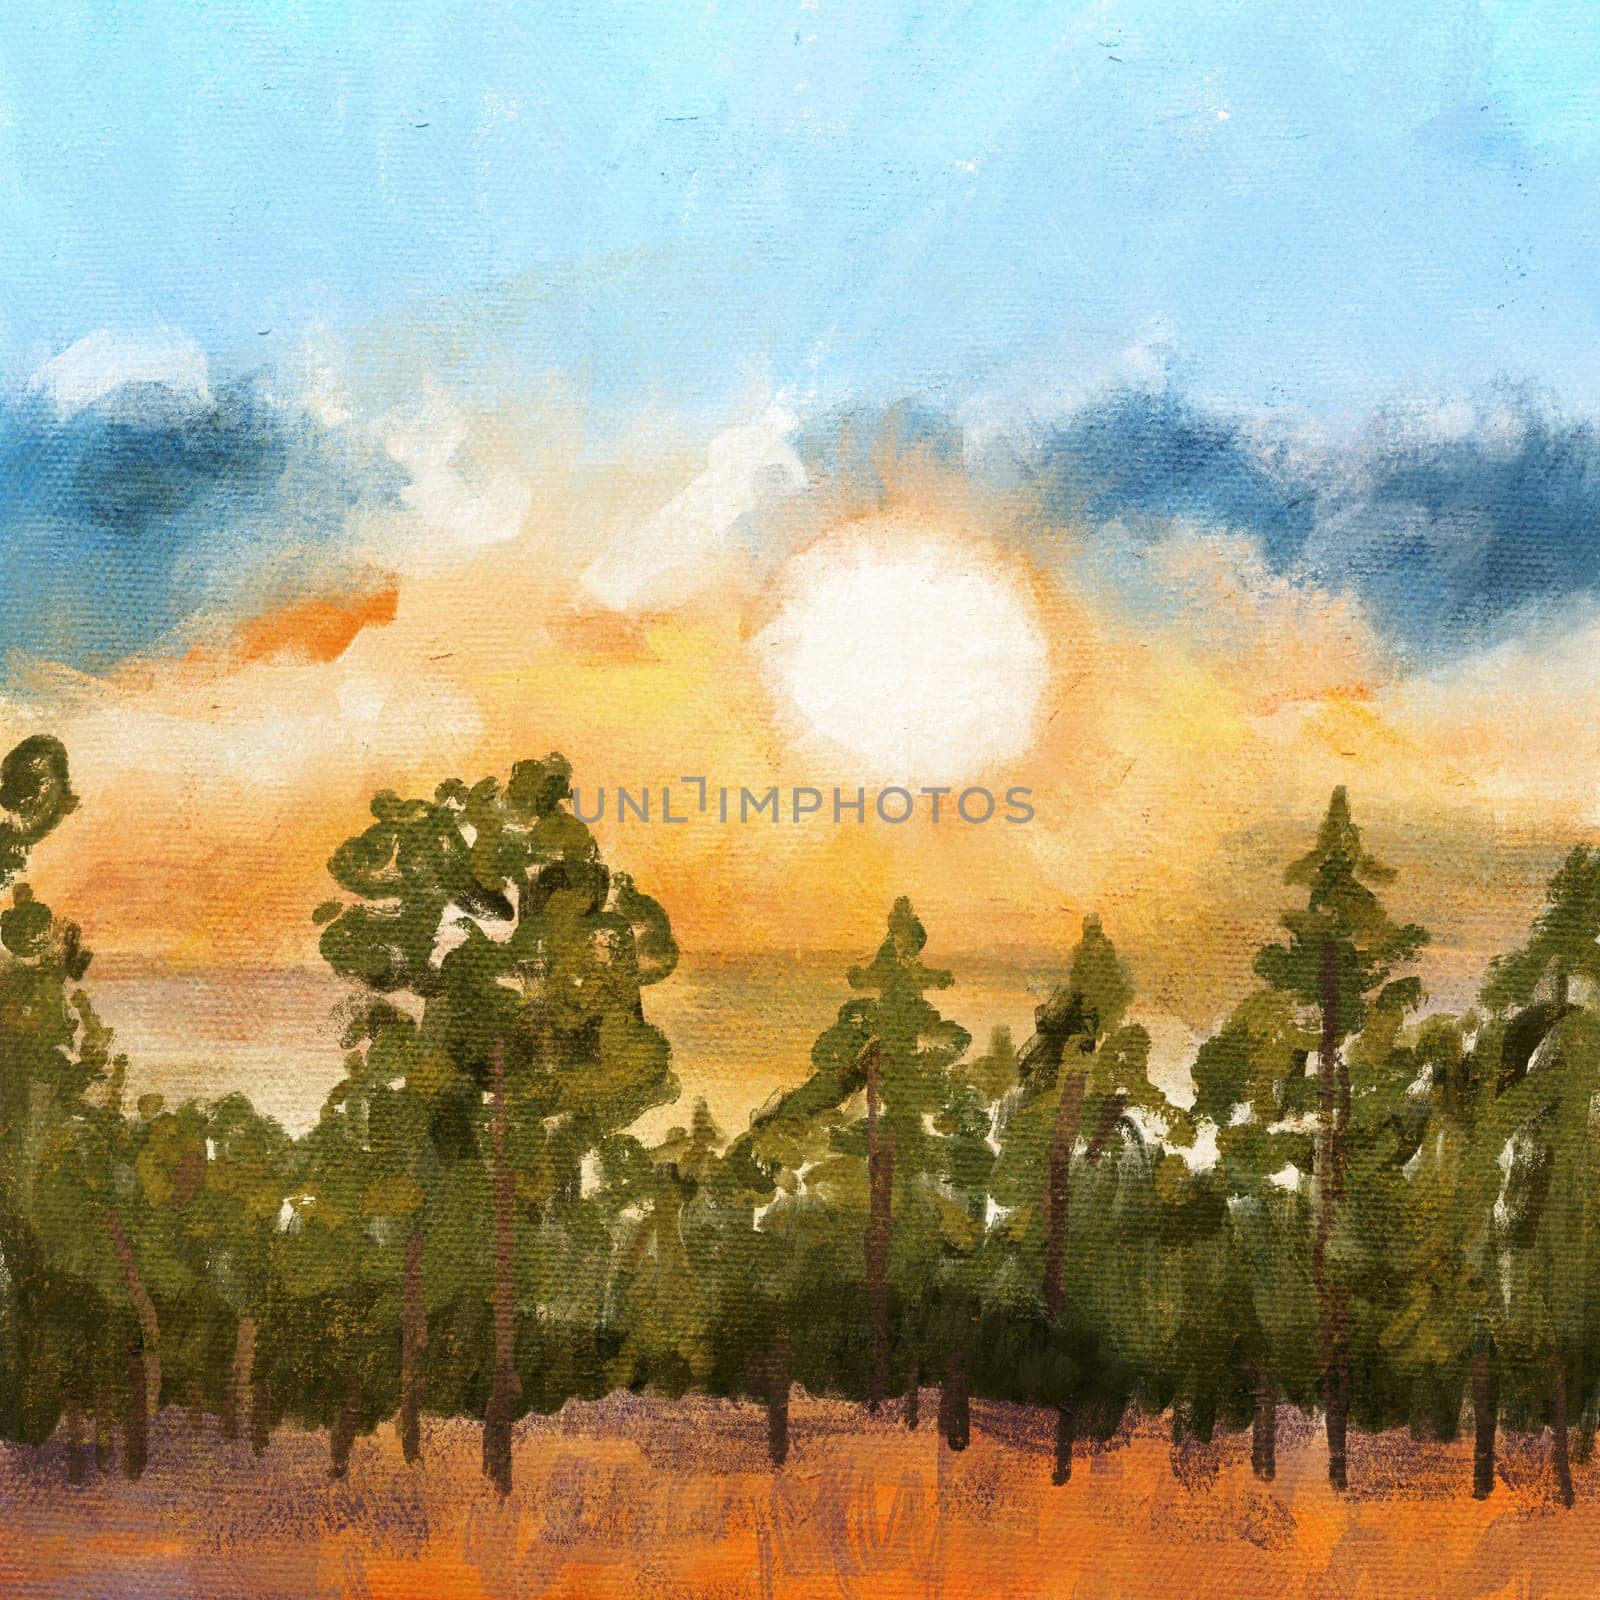 Hand drawn illustration of forest wood in sunrise sunset sky. Pine fir trees in evening light blye sky, nature landscape view, outdoor scenery. Oil painting paints texture